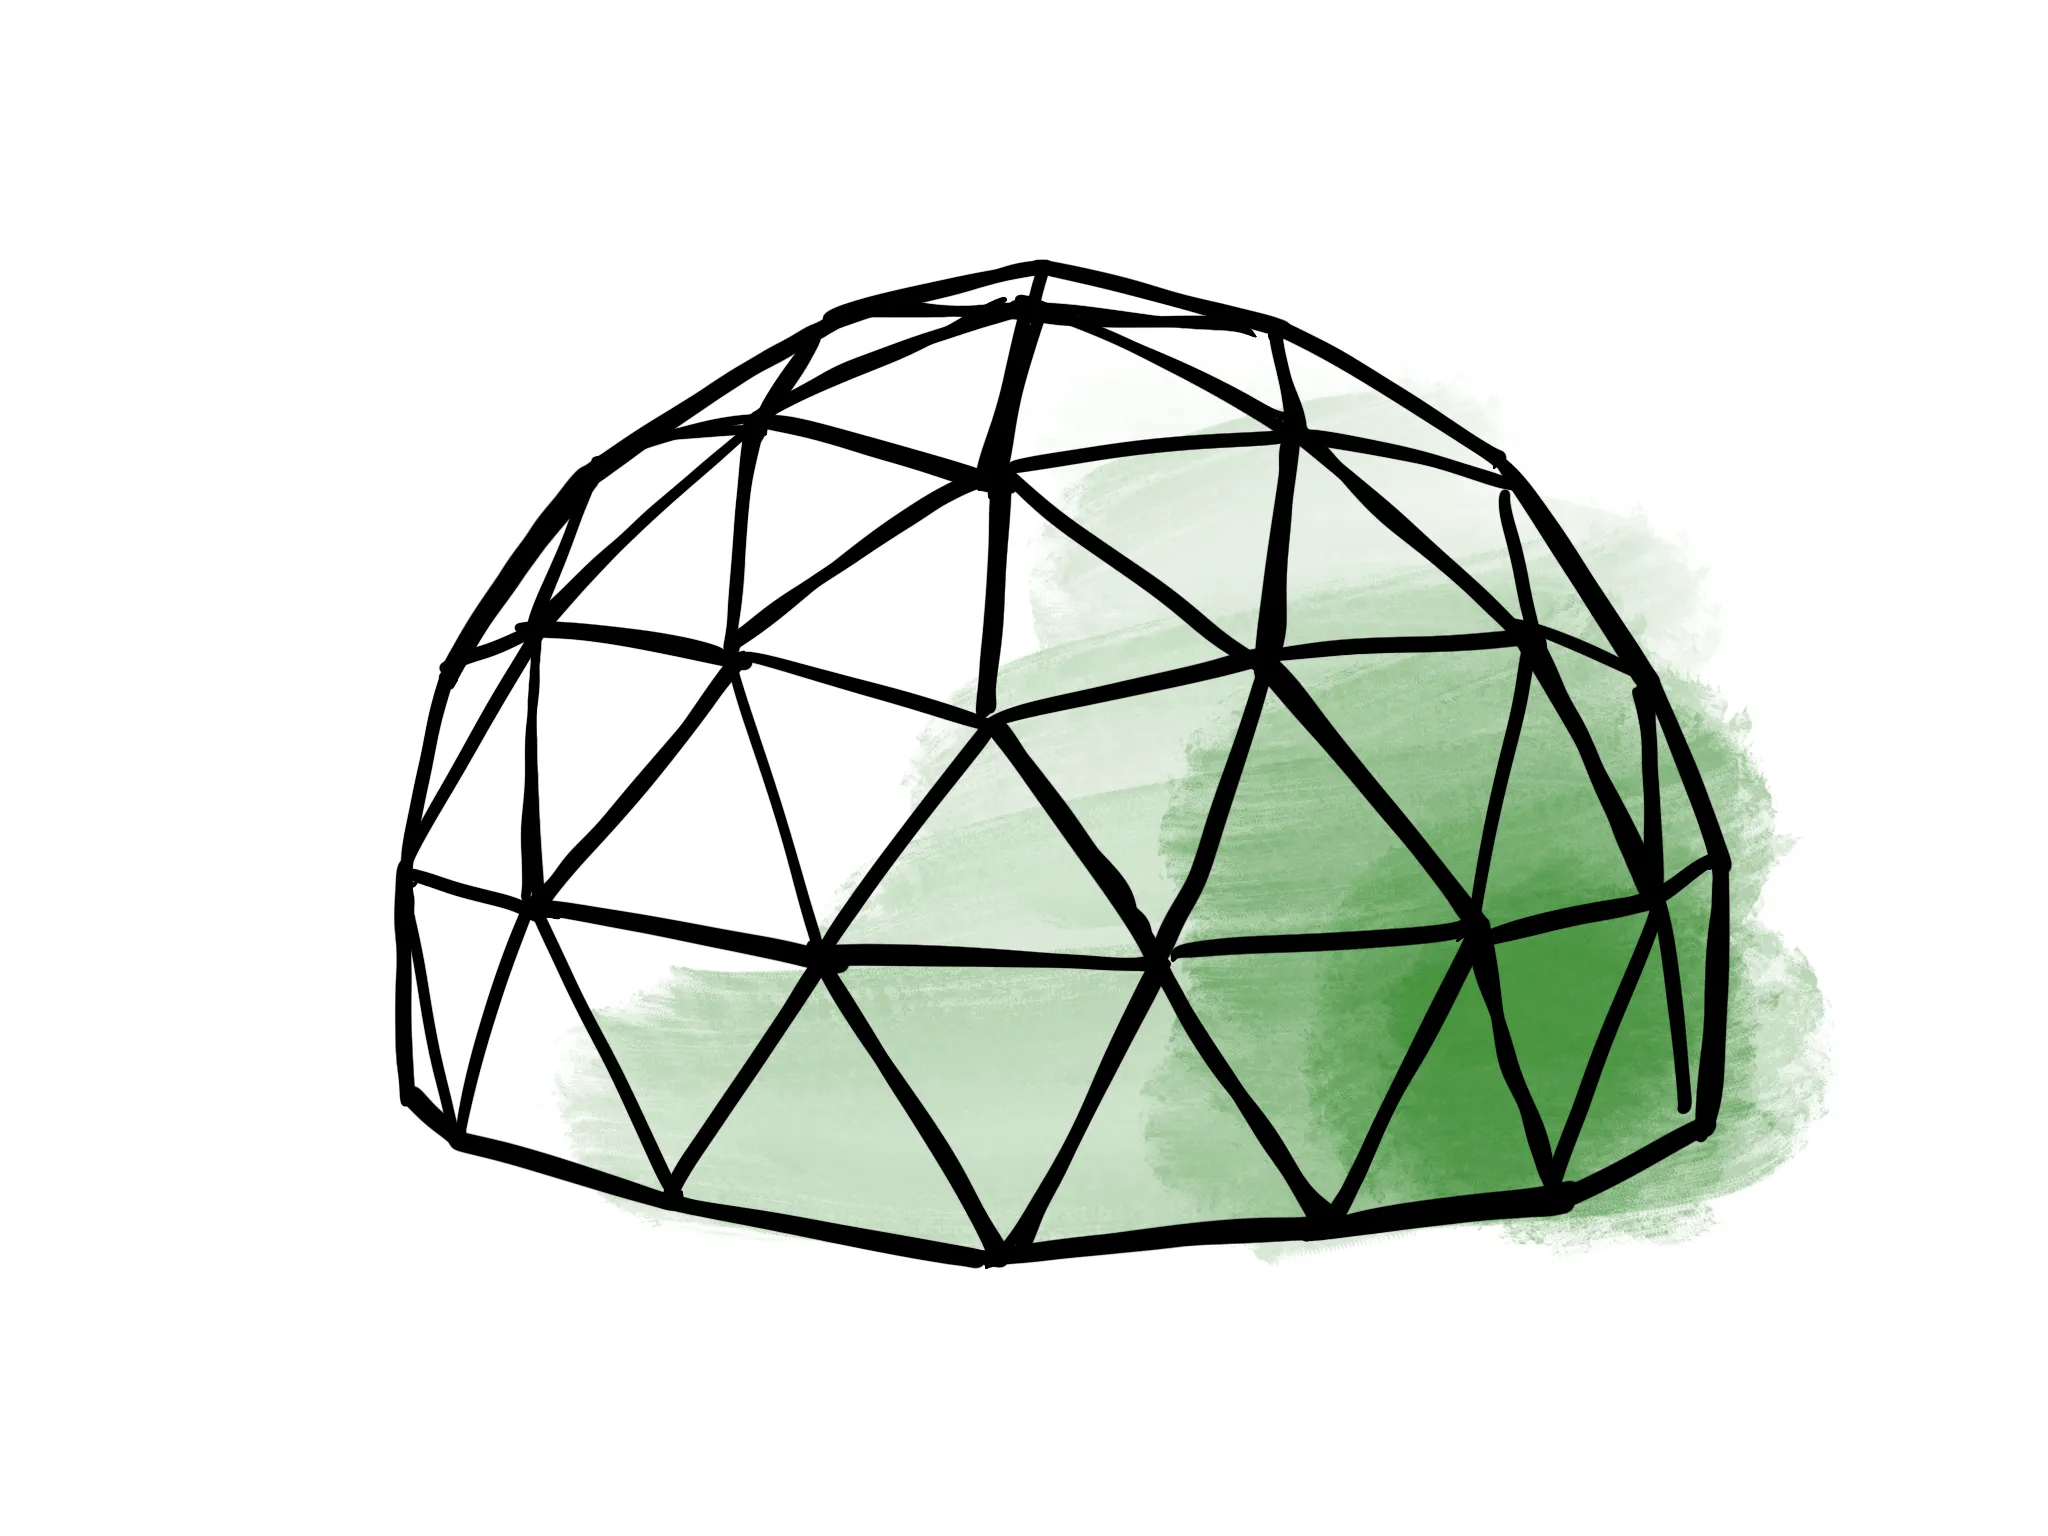 One of the strongest free-standing structures is a geodesic dome. Each joint is multiply connected. If you remove any random supporting bar it will have little effect on the strength of the structure as a whole. Role-based organisations take advantage of this: individuals can hold multiple roles, and roles can be held by multiple people.